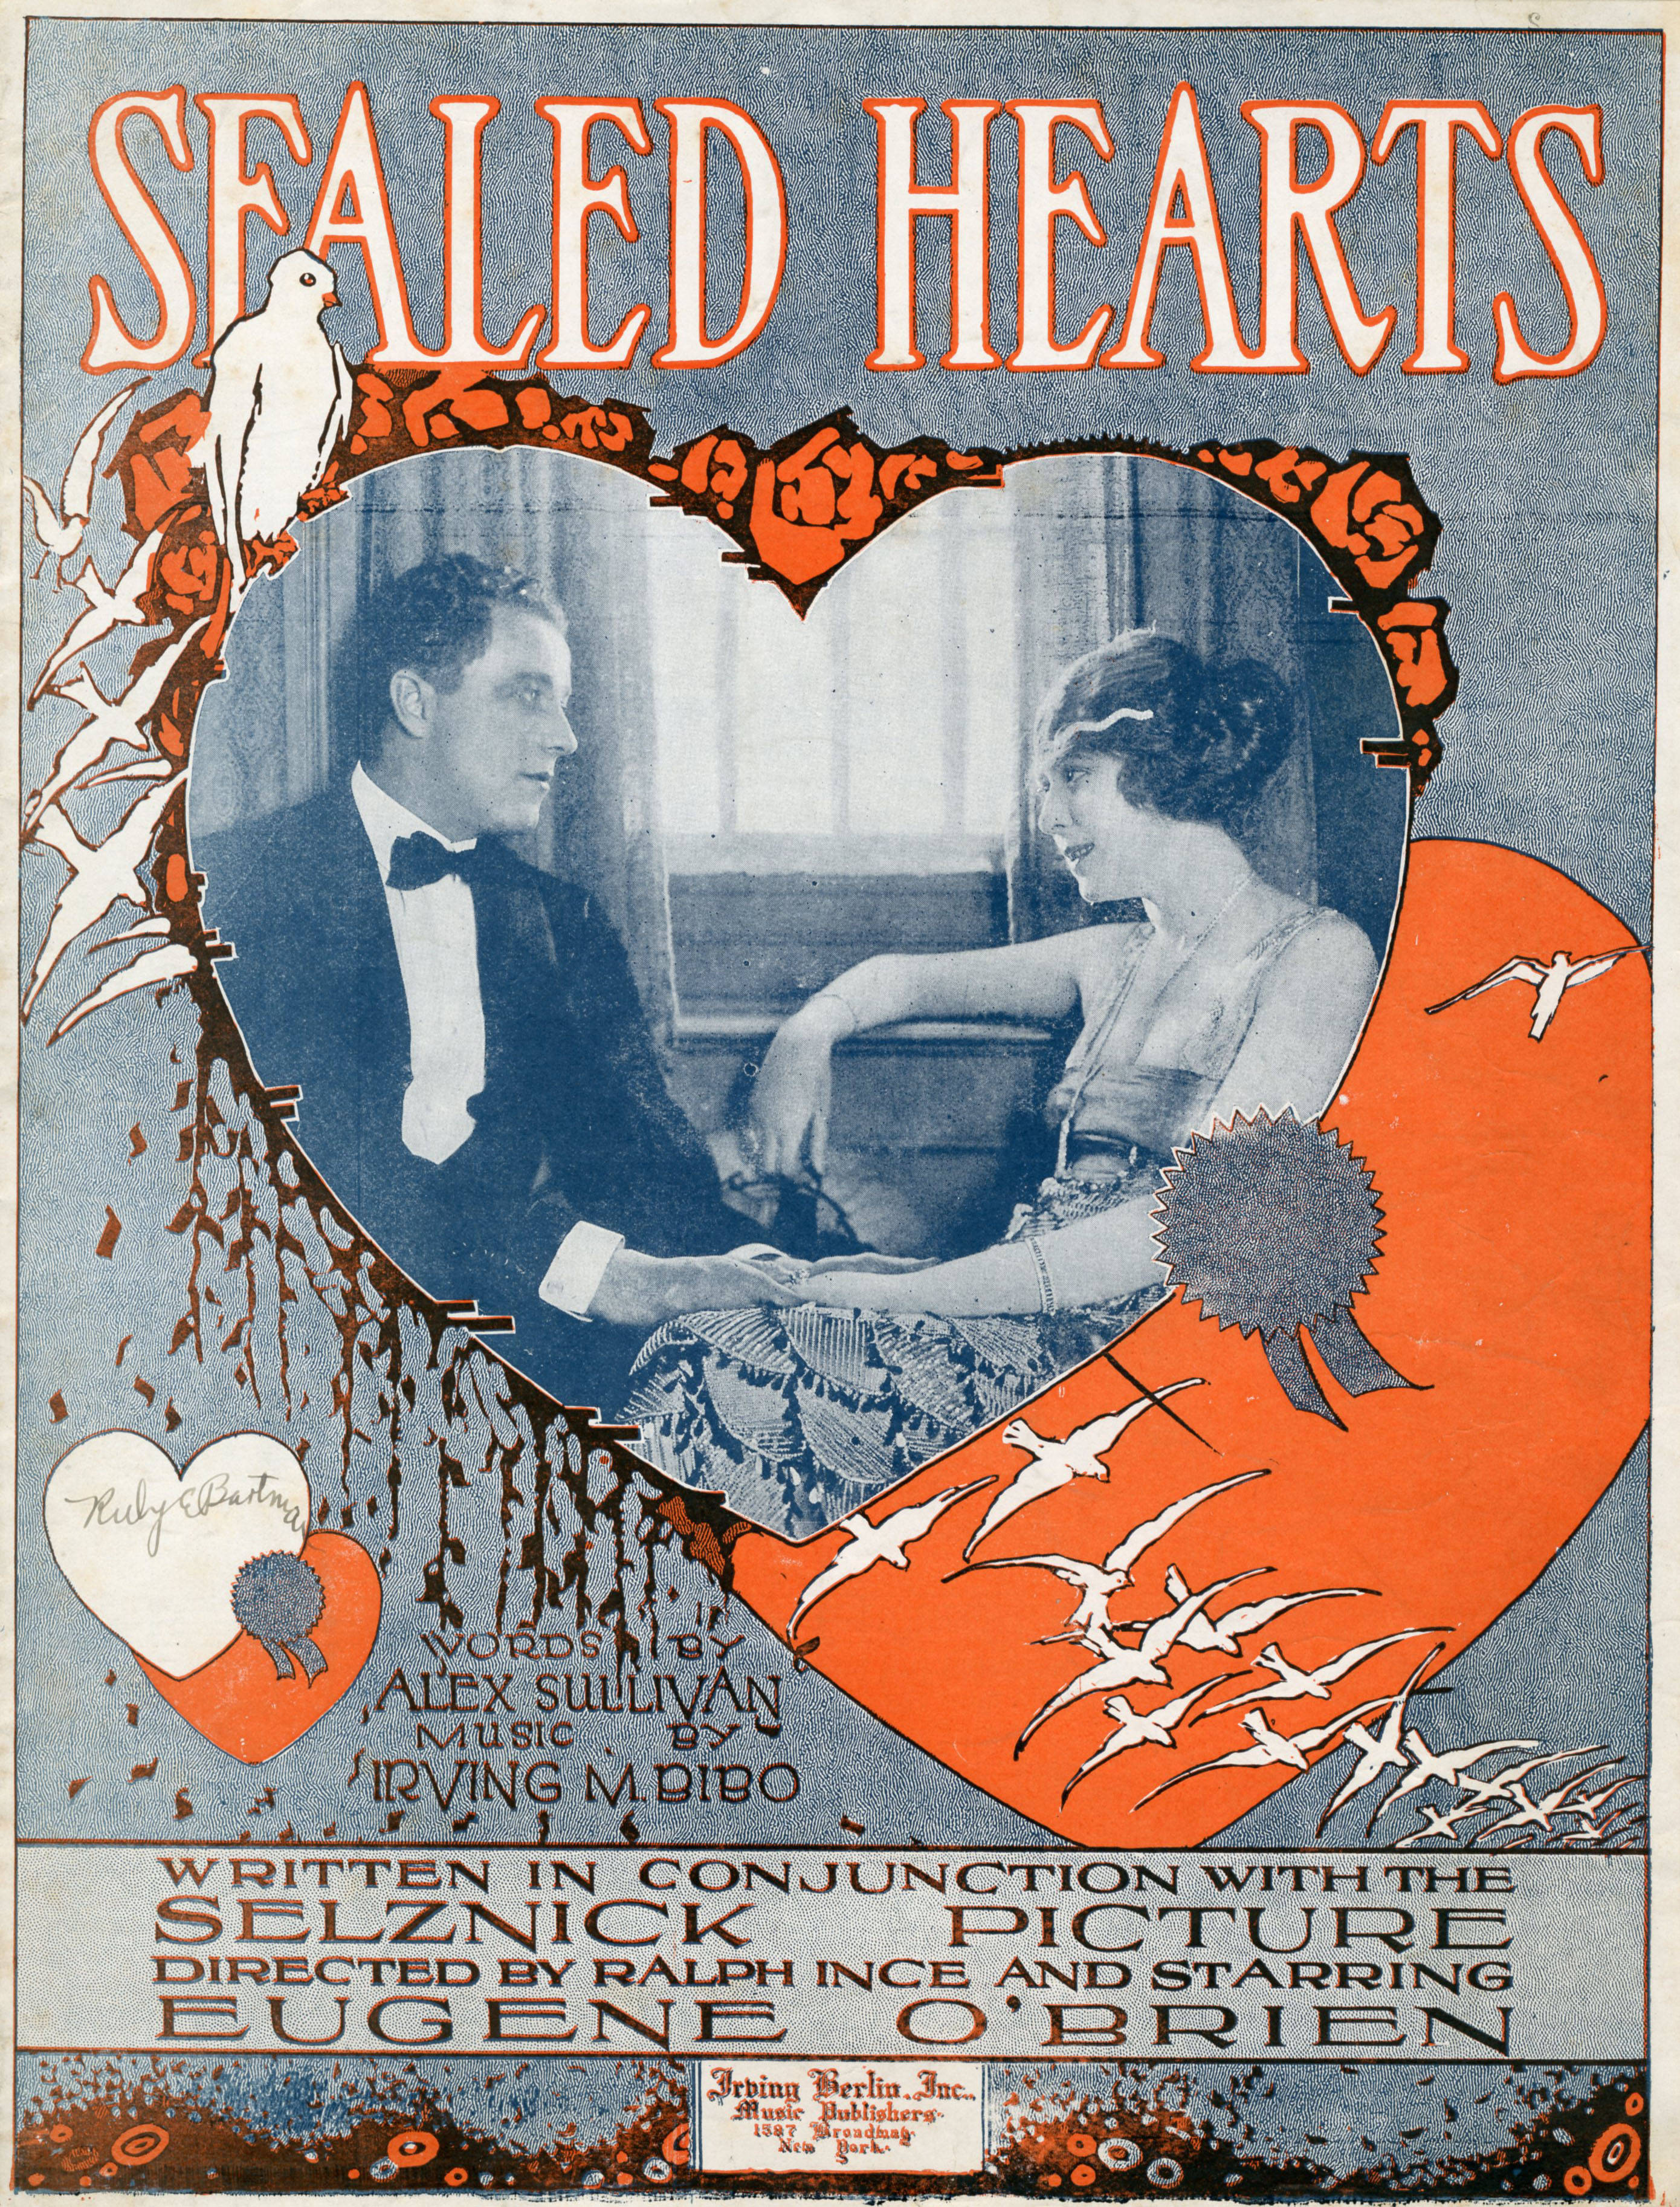 Sheet music cover - SEALED HEARTS (1919)